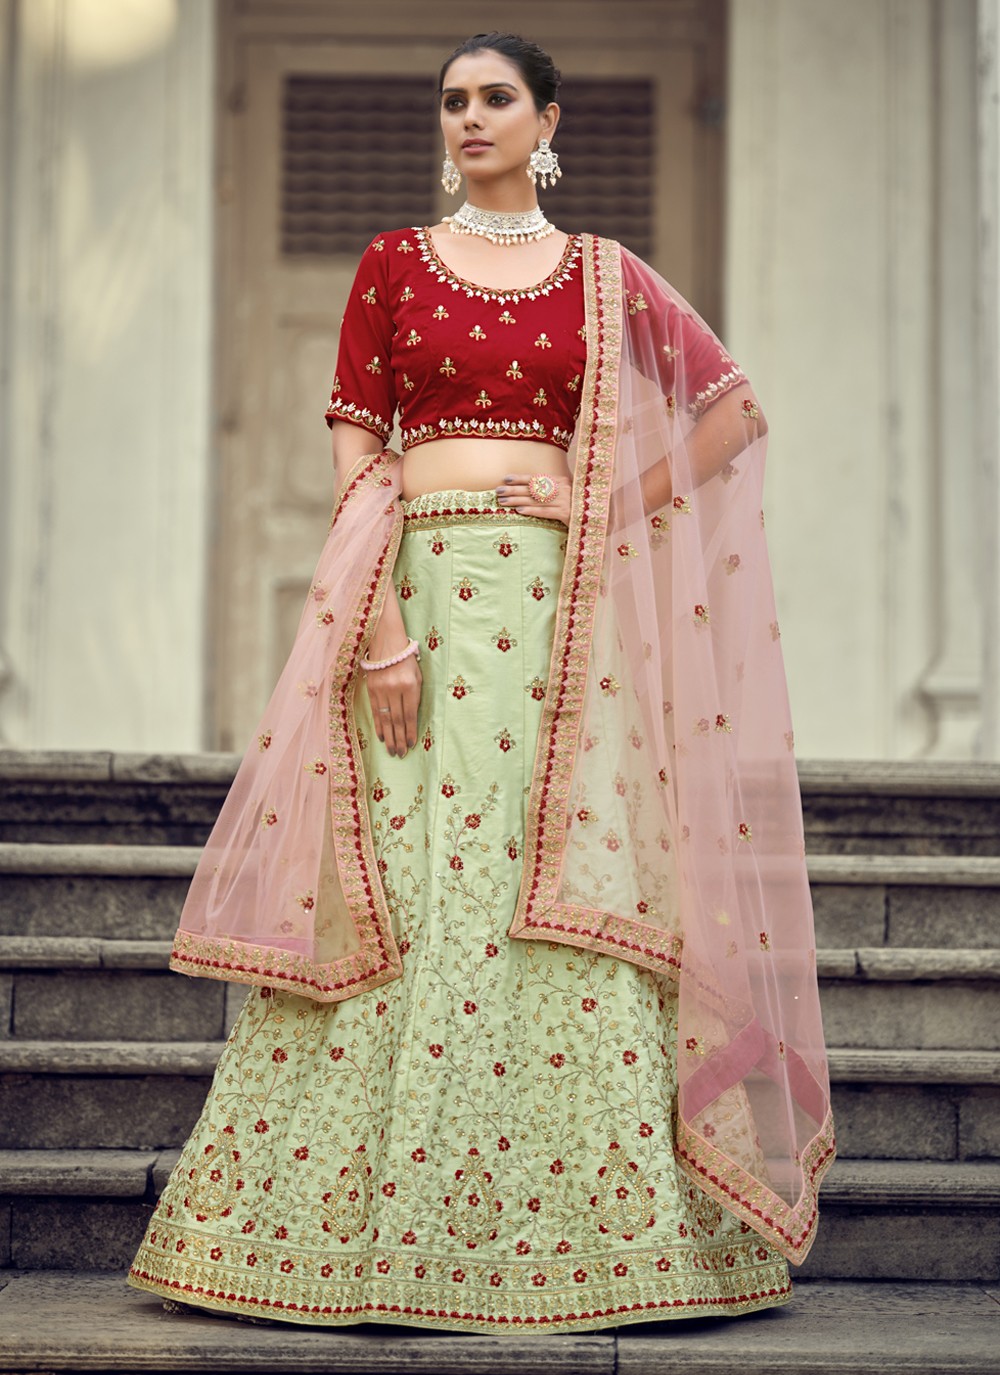 Urva Vol 3 D-1141 Buy Lehenga For Girls Online At Best Prices In India  Collection